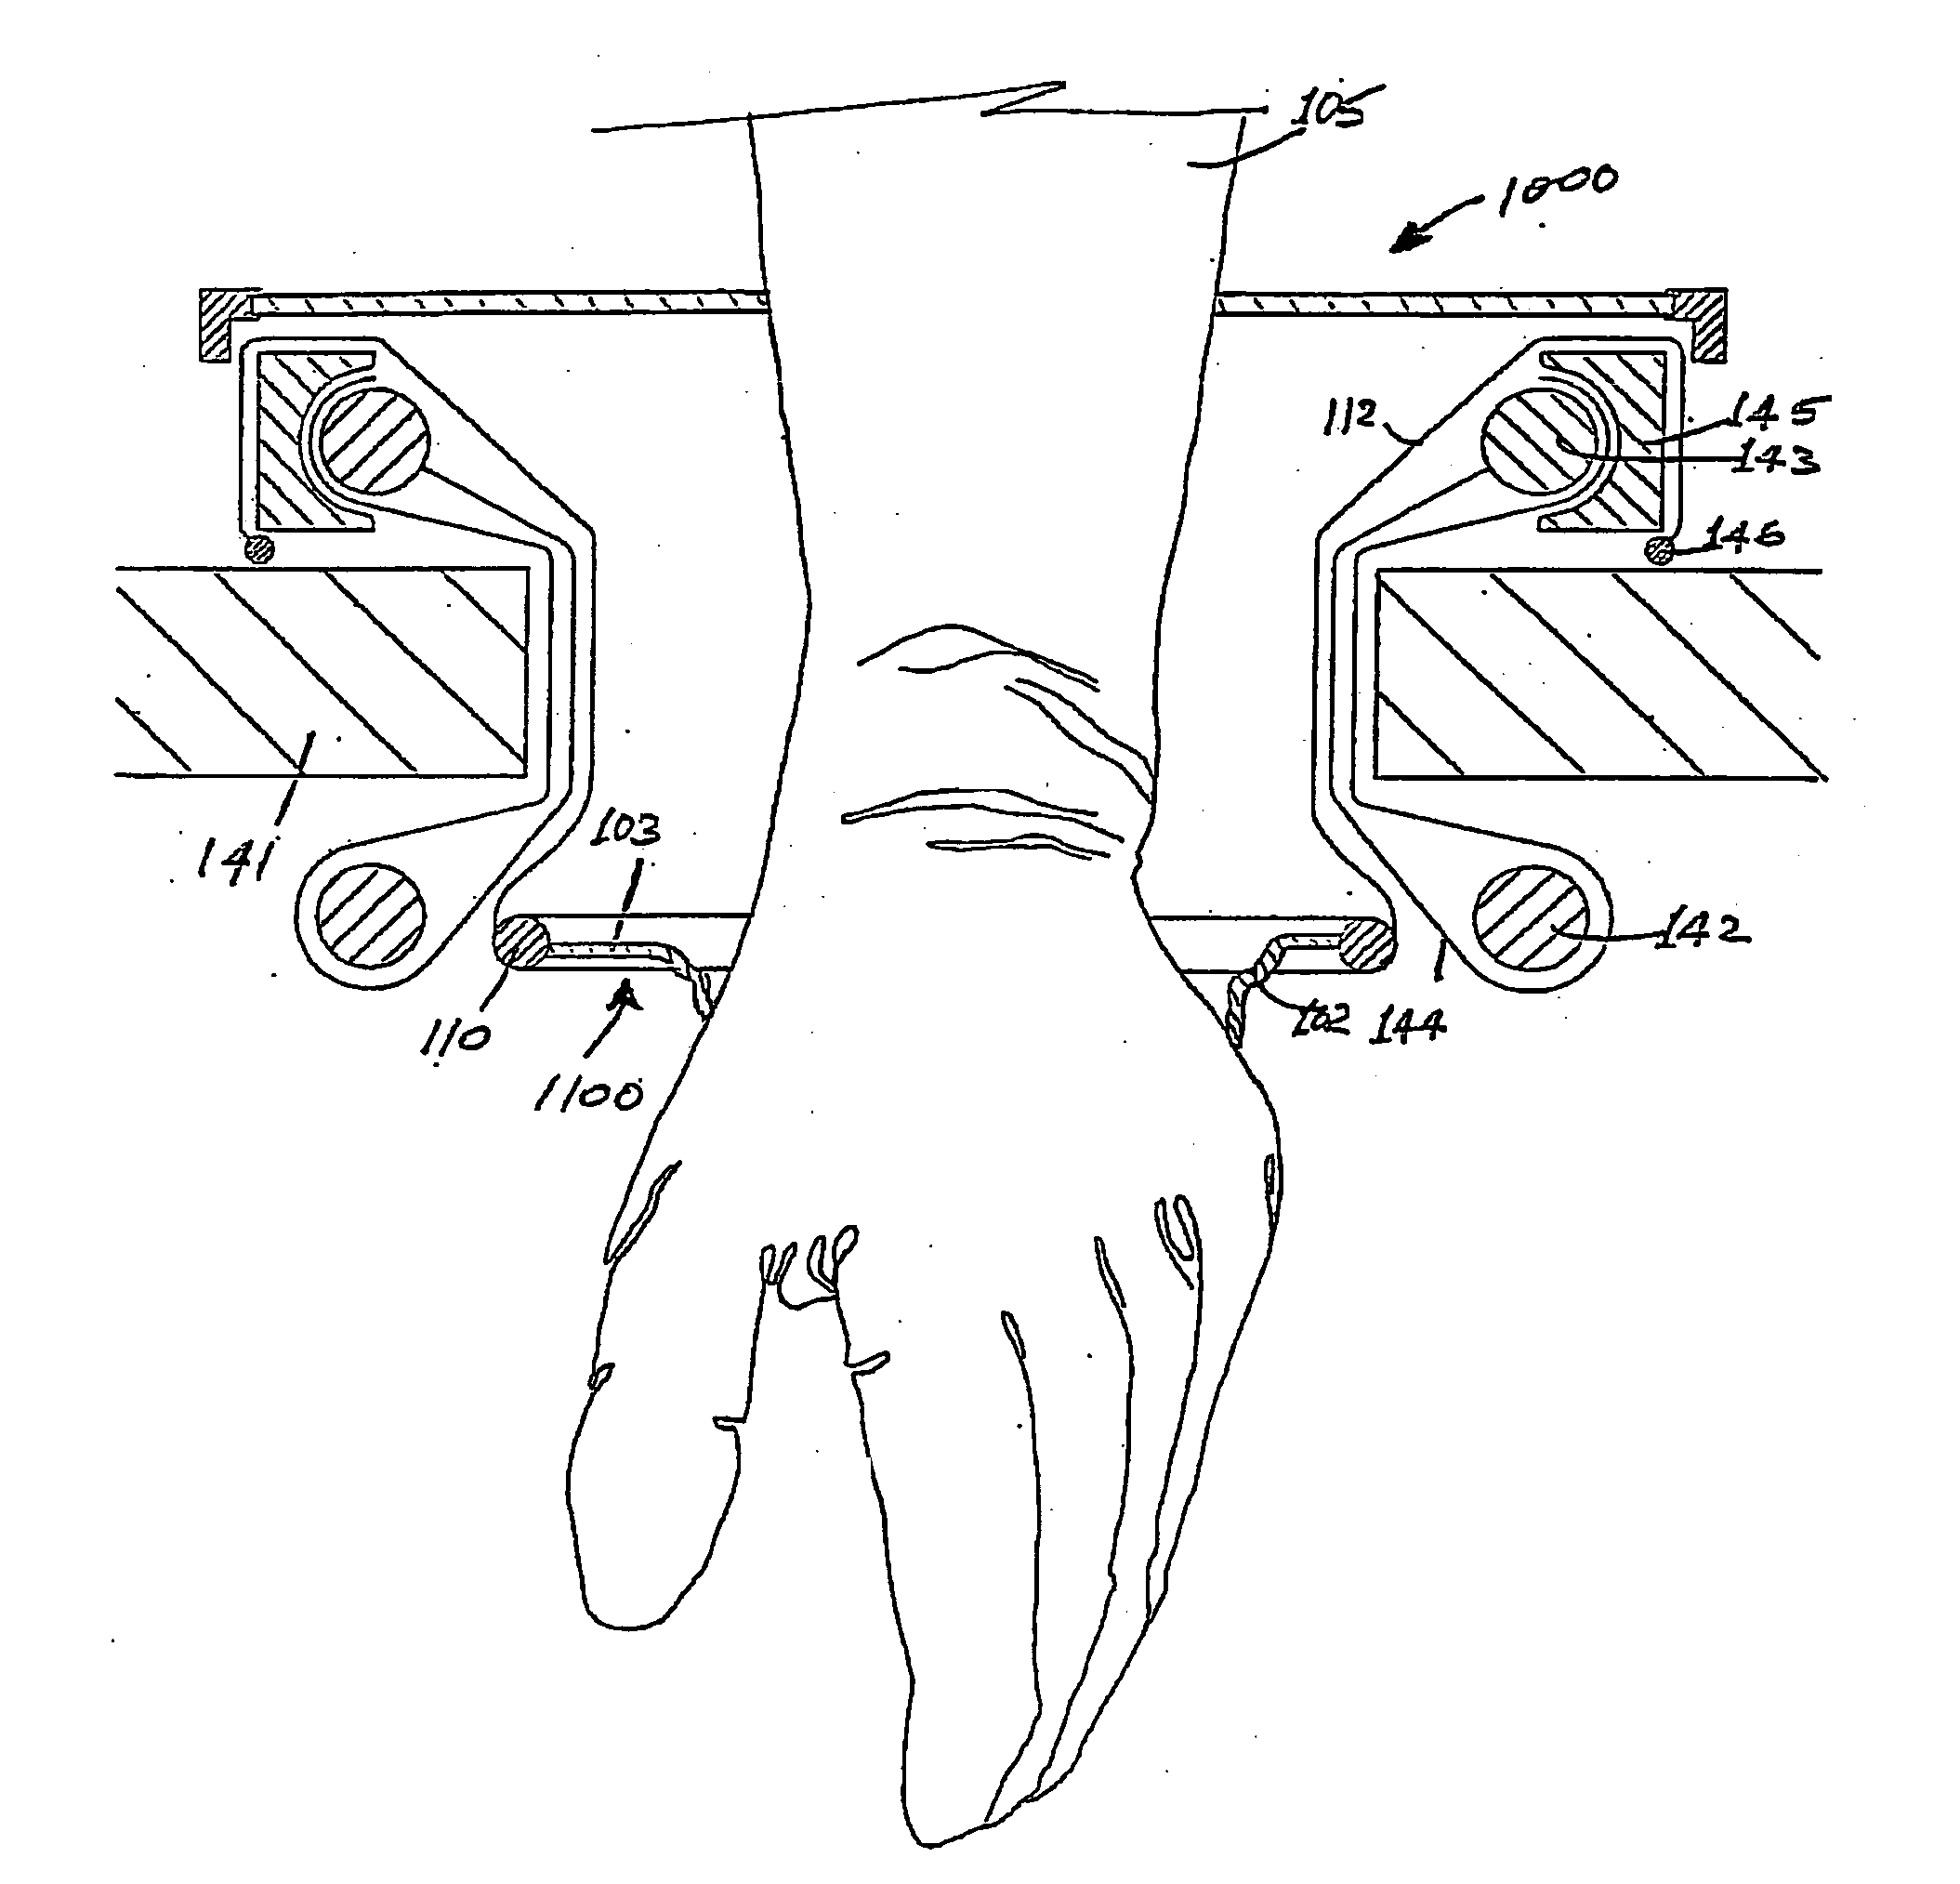 A surgical sealing device